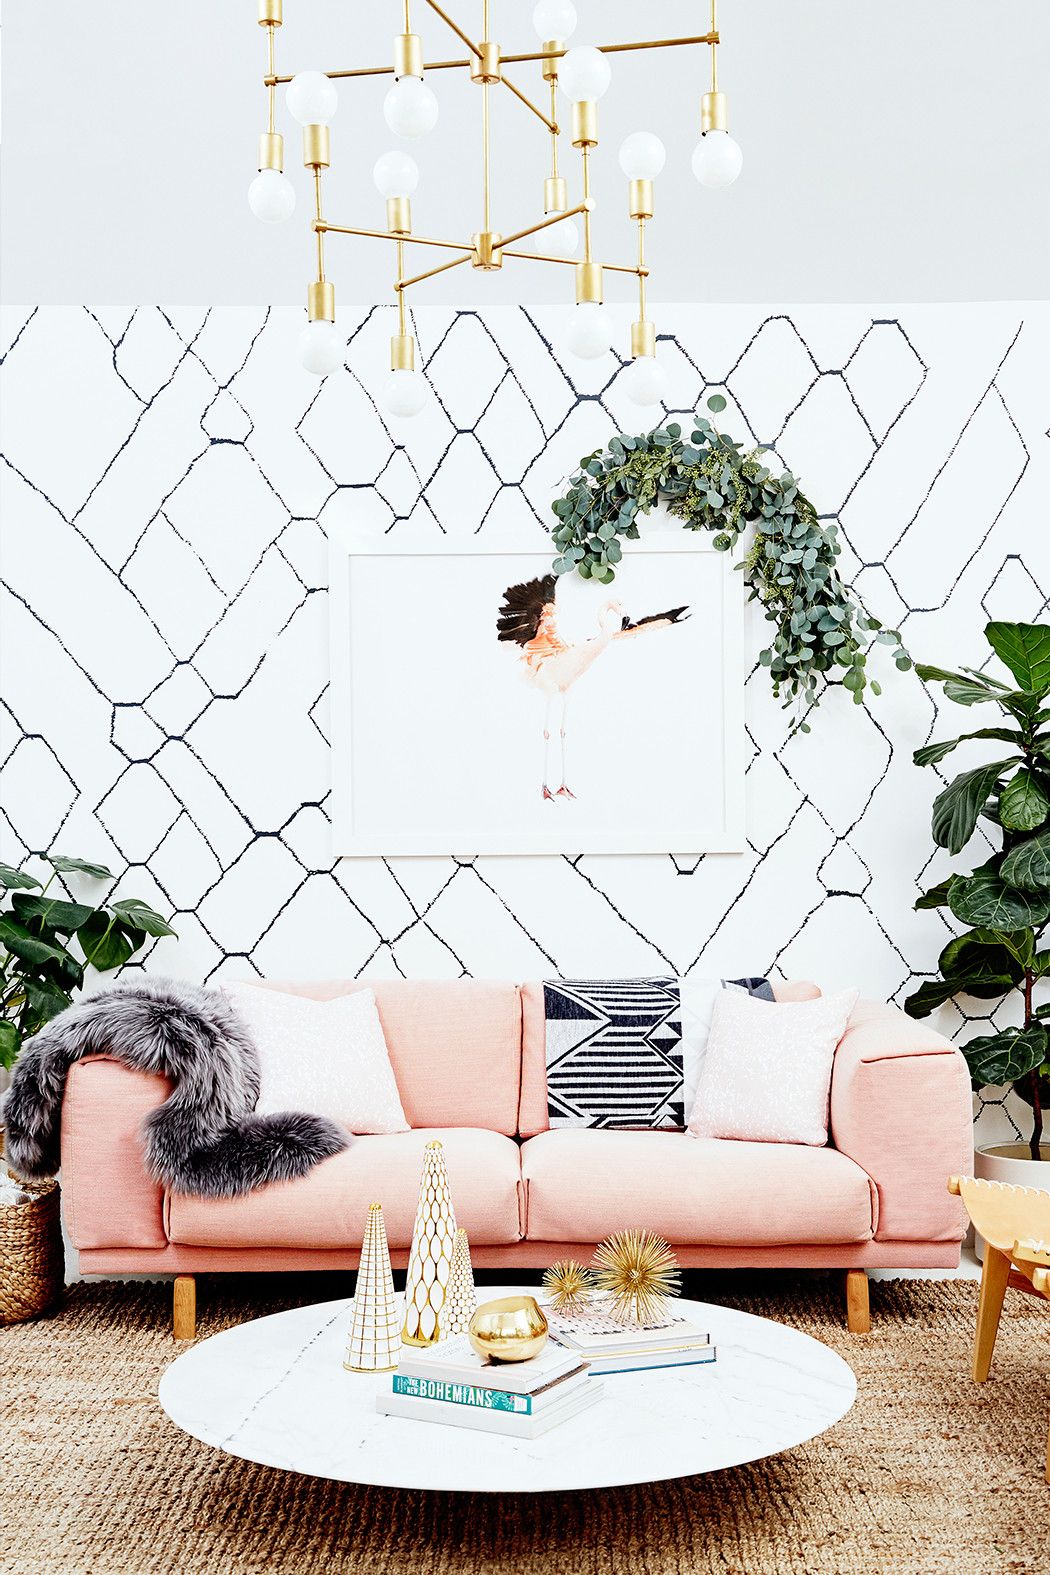 Metallic Accents, Cozy Throws and Pink Sofa